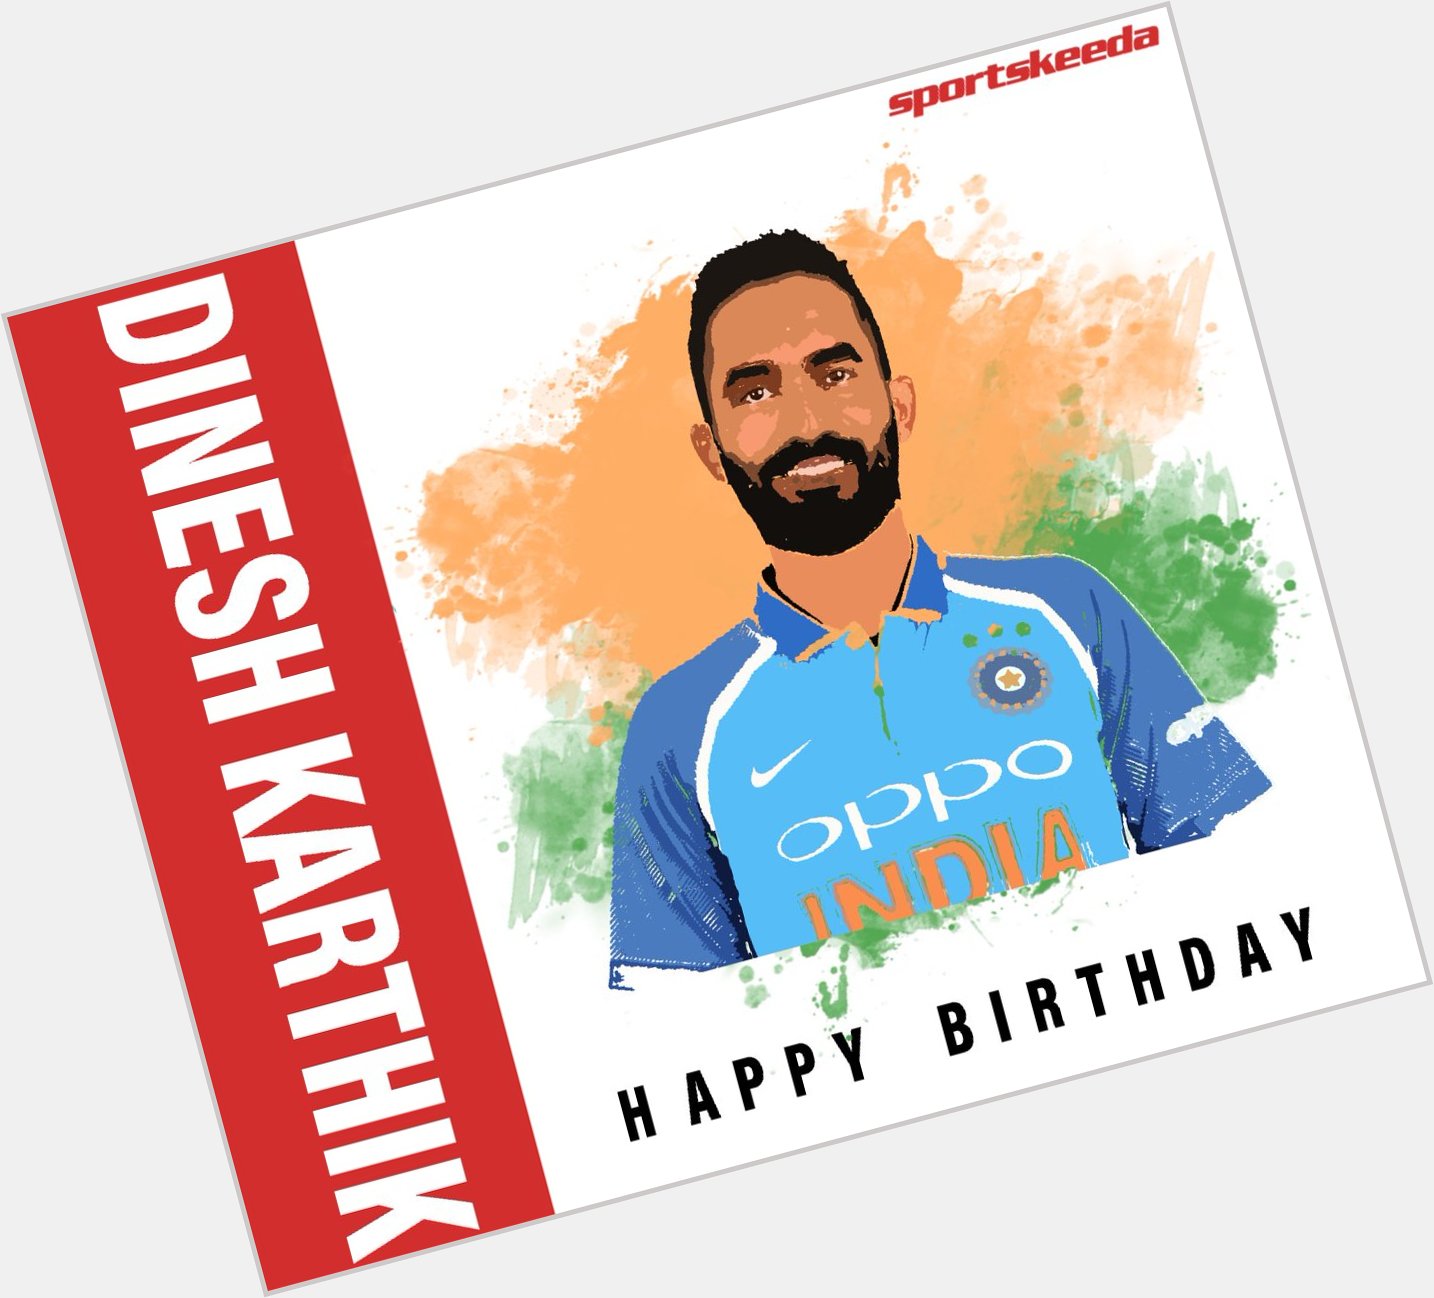 Happy Birthday Dinesh Karthik !

Do you remember his match winning innings in Nidahas trophy final? 